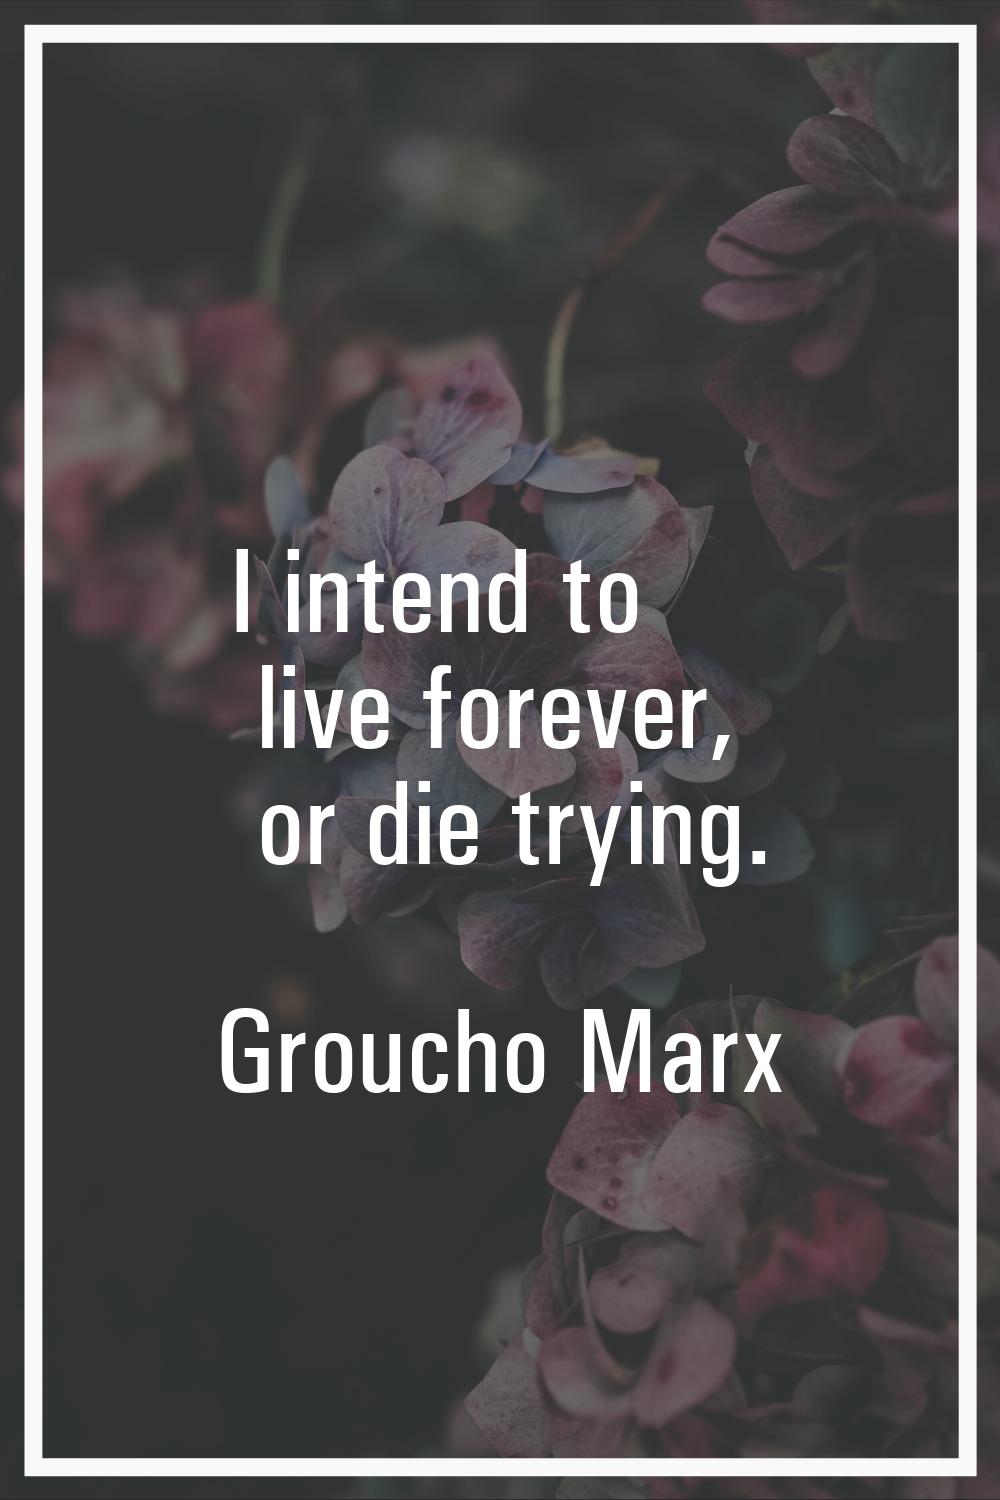 I intend to live forever, or die trying.